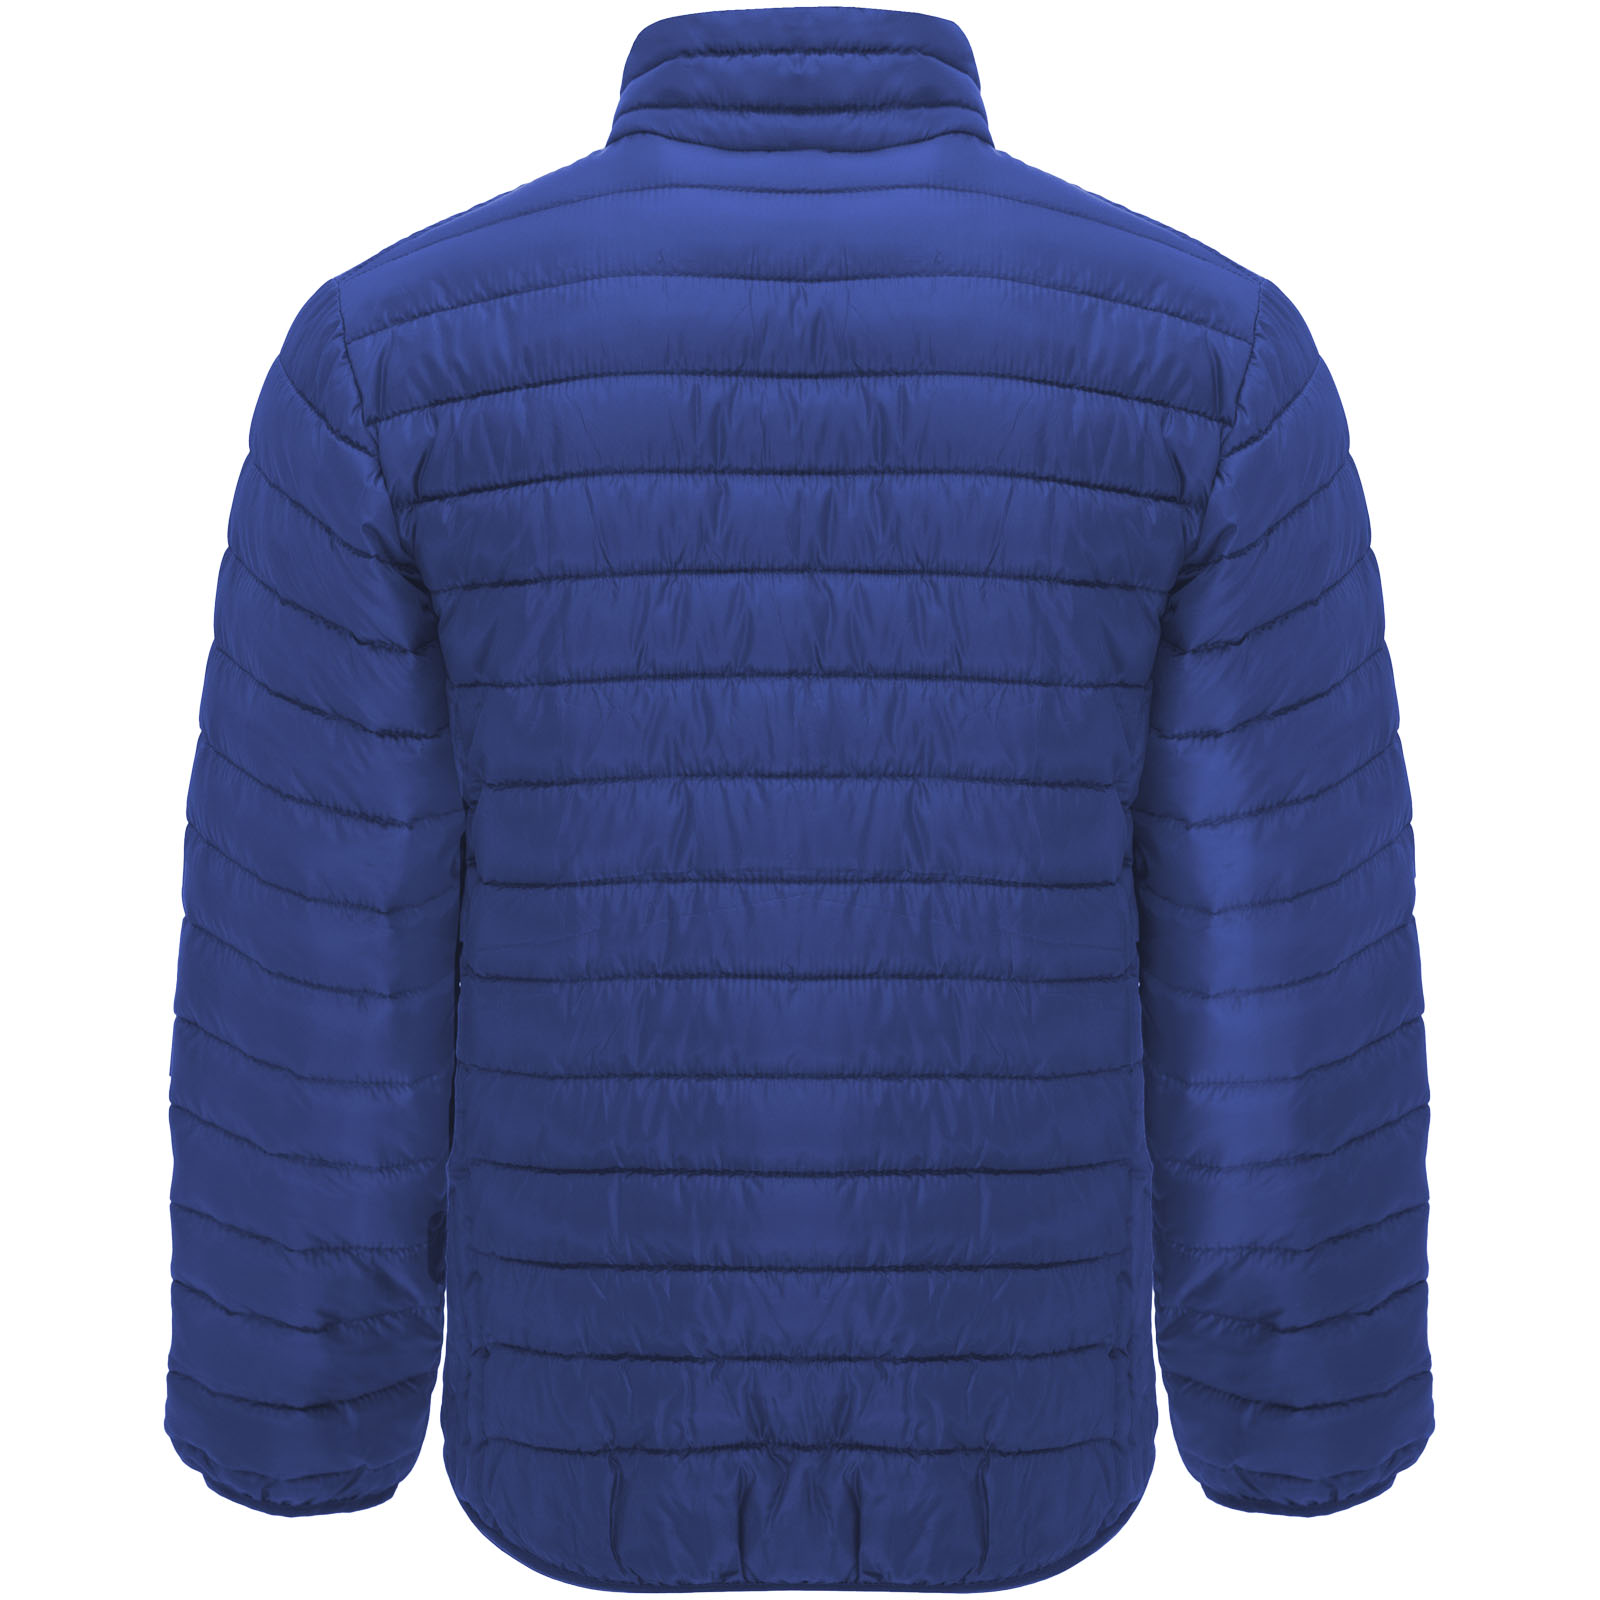 Advertising Jackets - Finland men's insulated jacket - 1